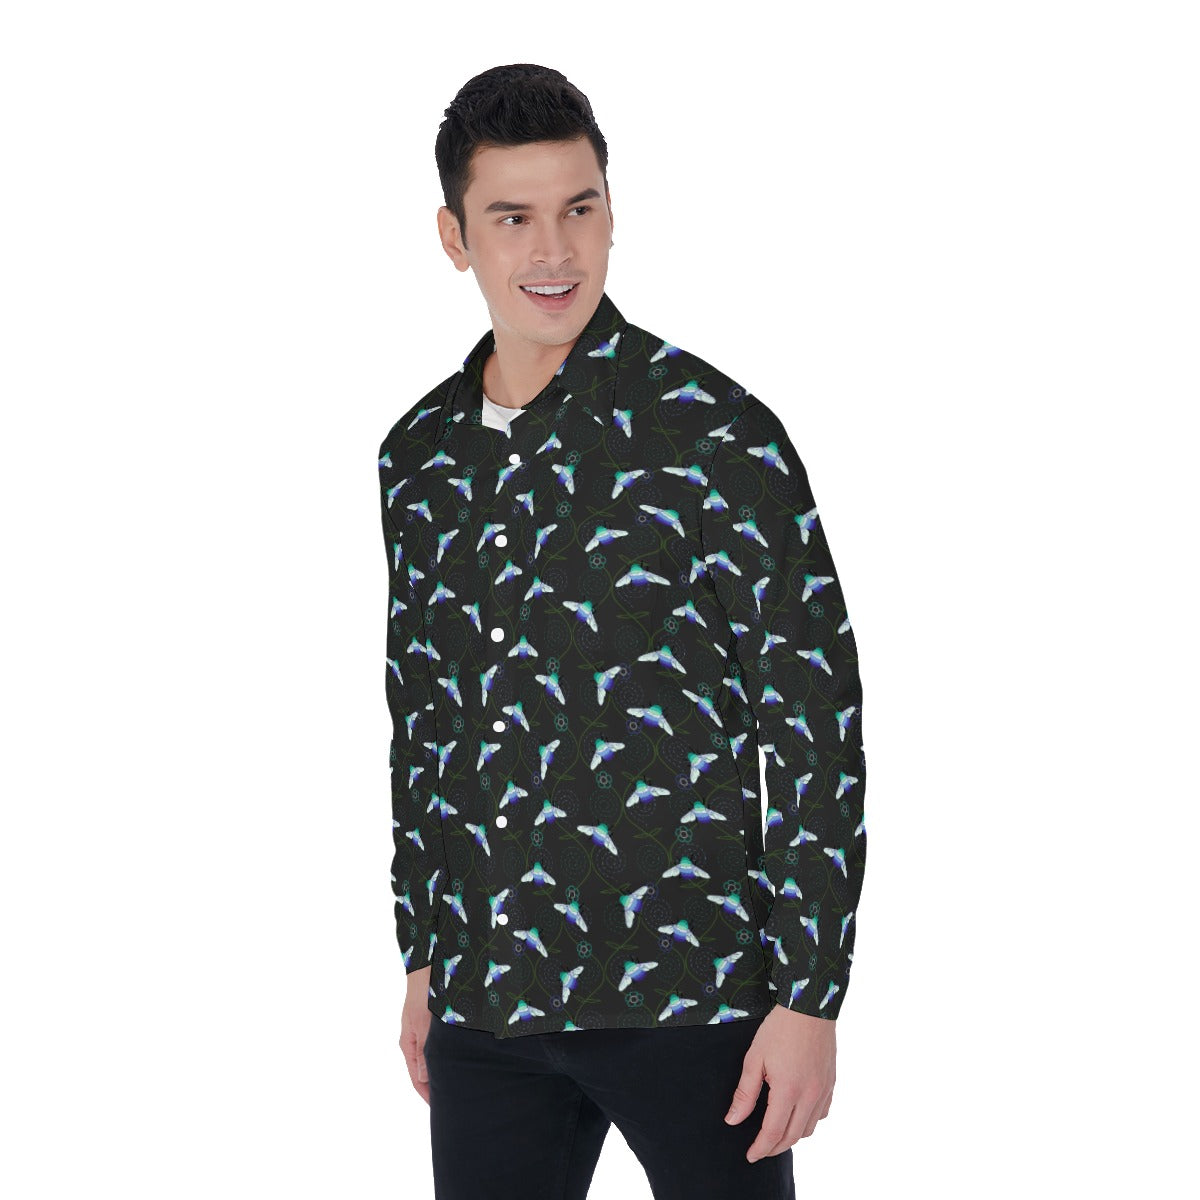 Bumblebee and Vine Pattern 4-Way Stretch Long Sleeve Shirt with Collar | Relaxed Fit | Choose Your Colourway